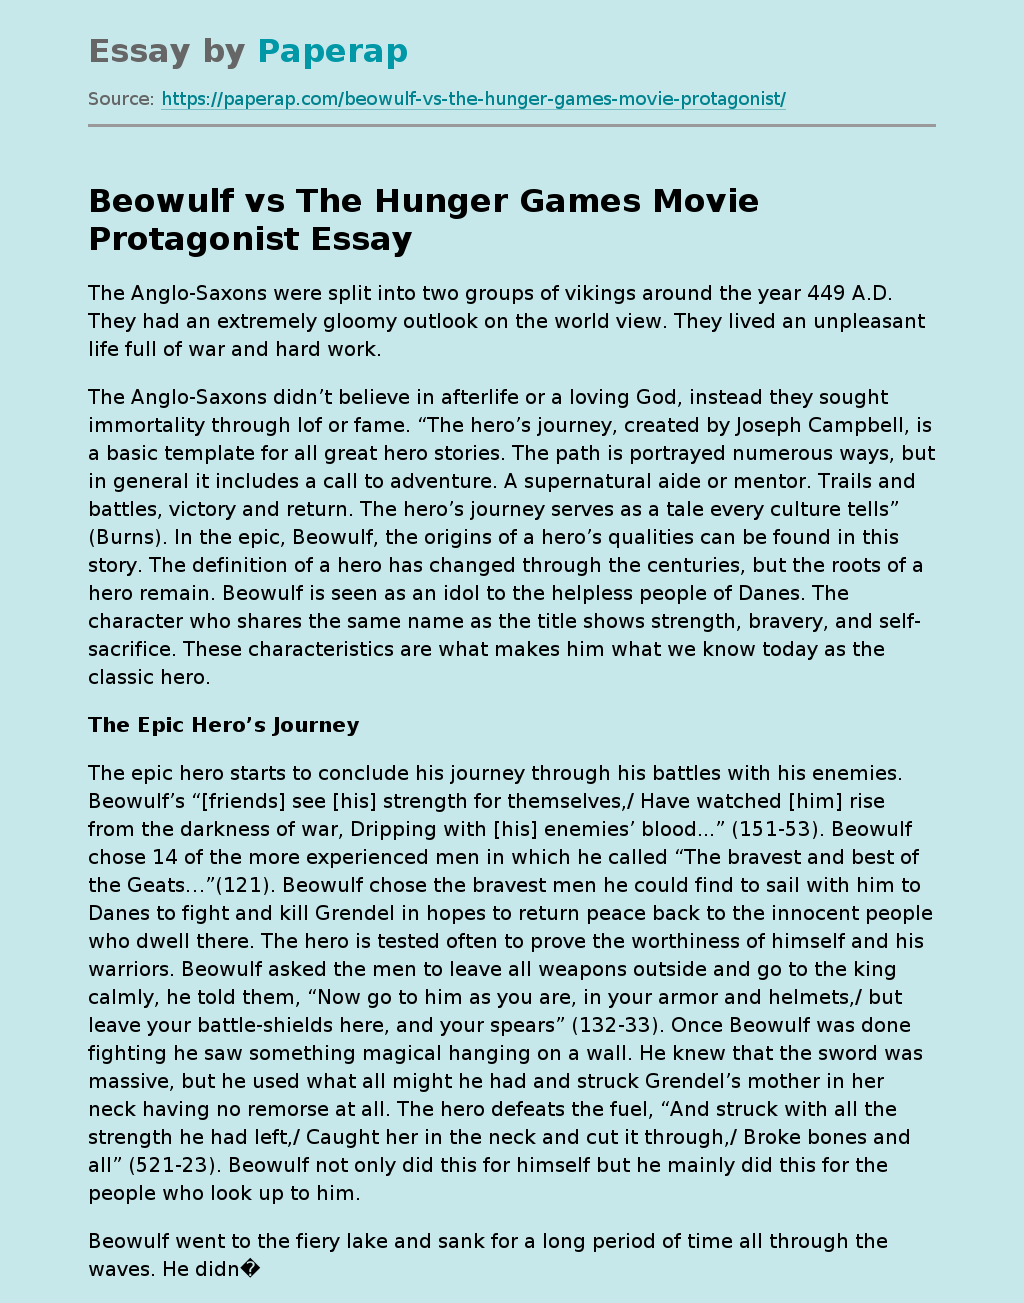 Beowulf vs The Hunger Games Movie Protagonist